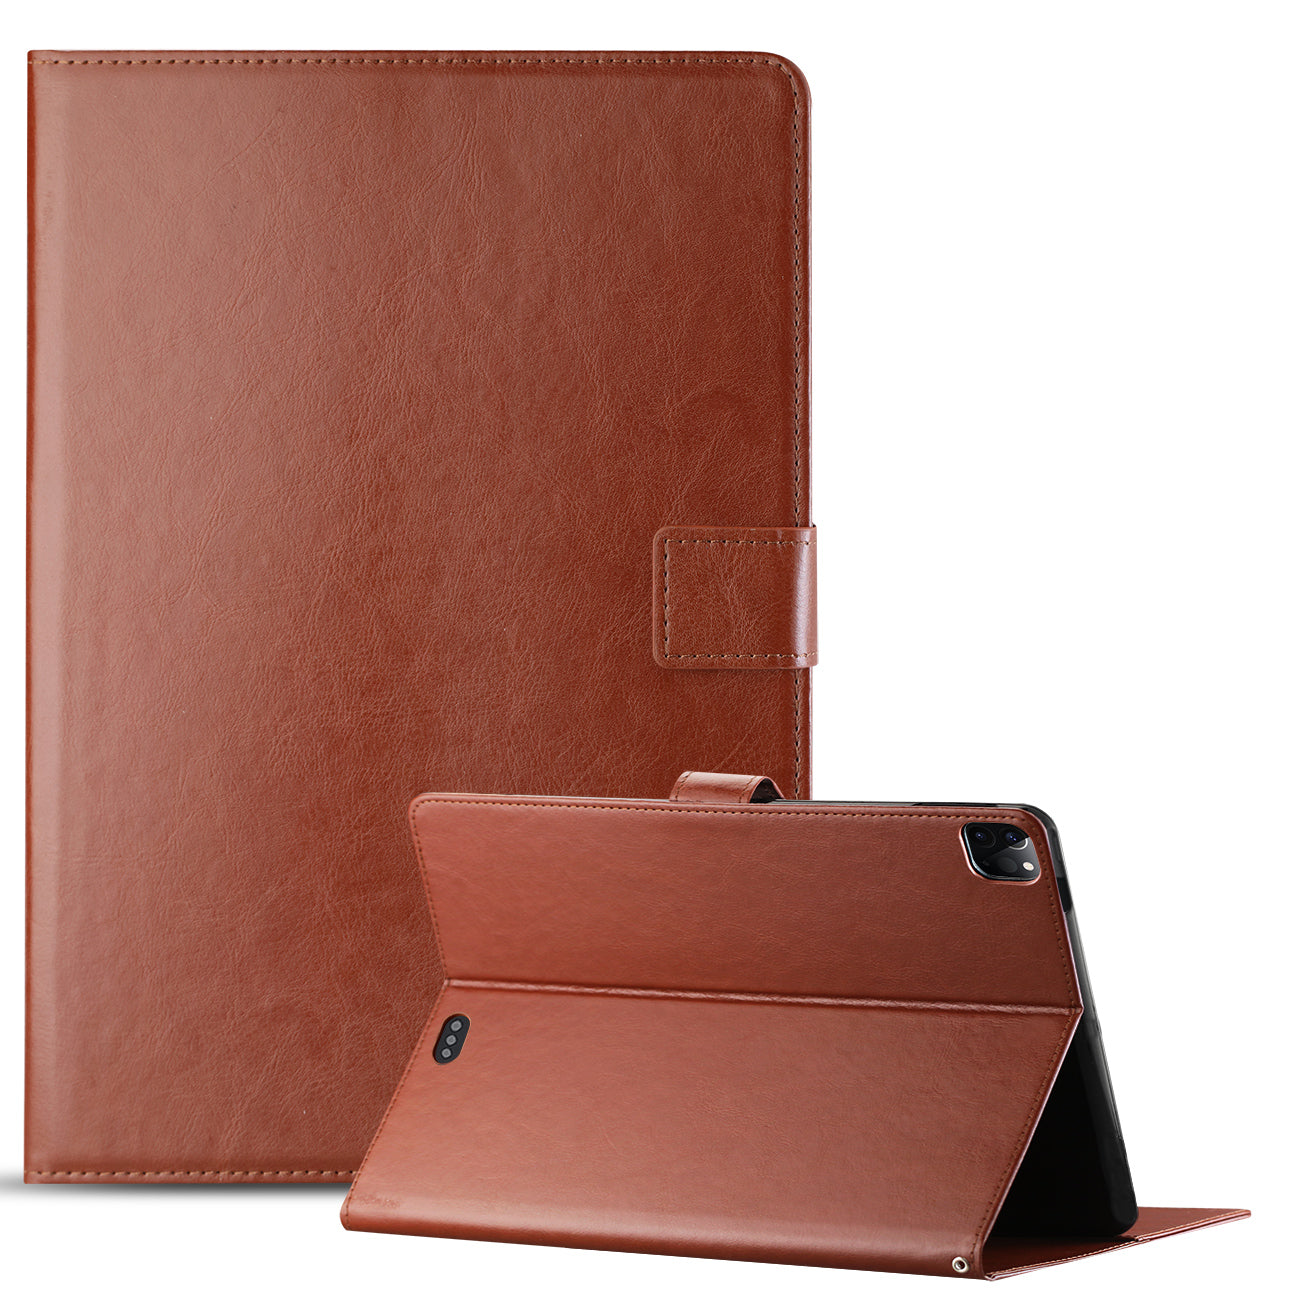 Reiko Leather Folio Cover Protective Case for 12.9" iPad Pro In Brown